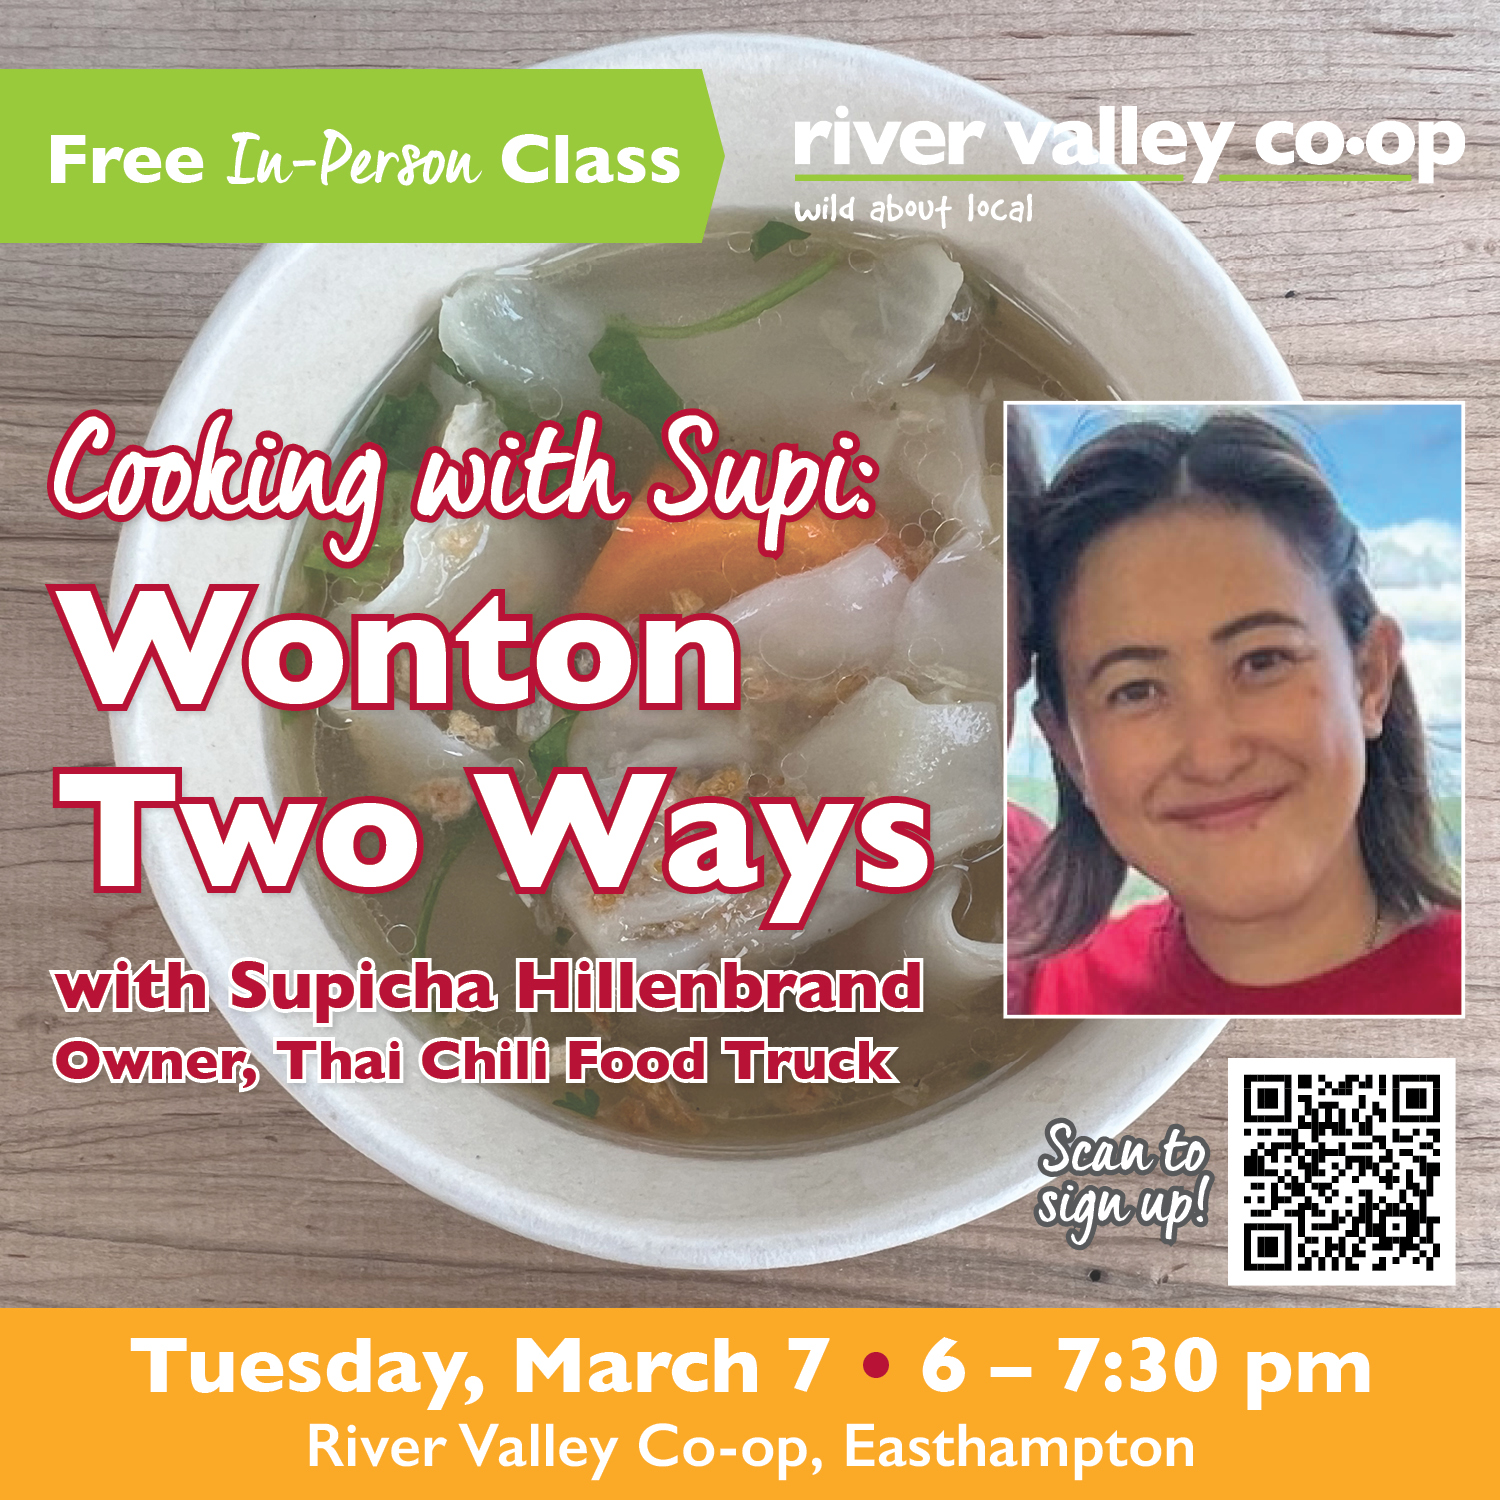 Cooking with Supi: Wonton Two Ways!